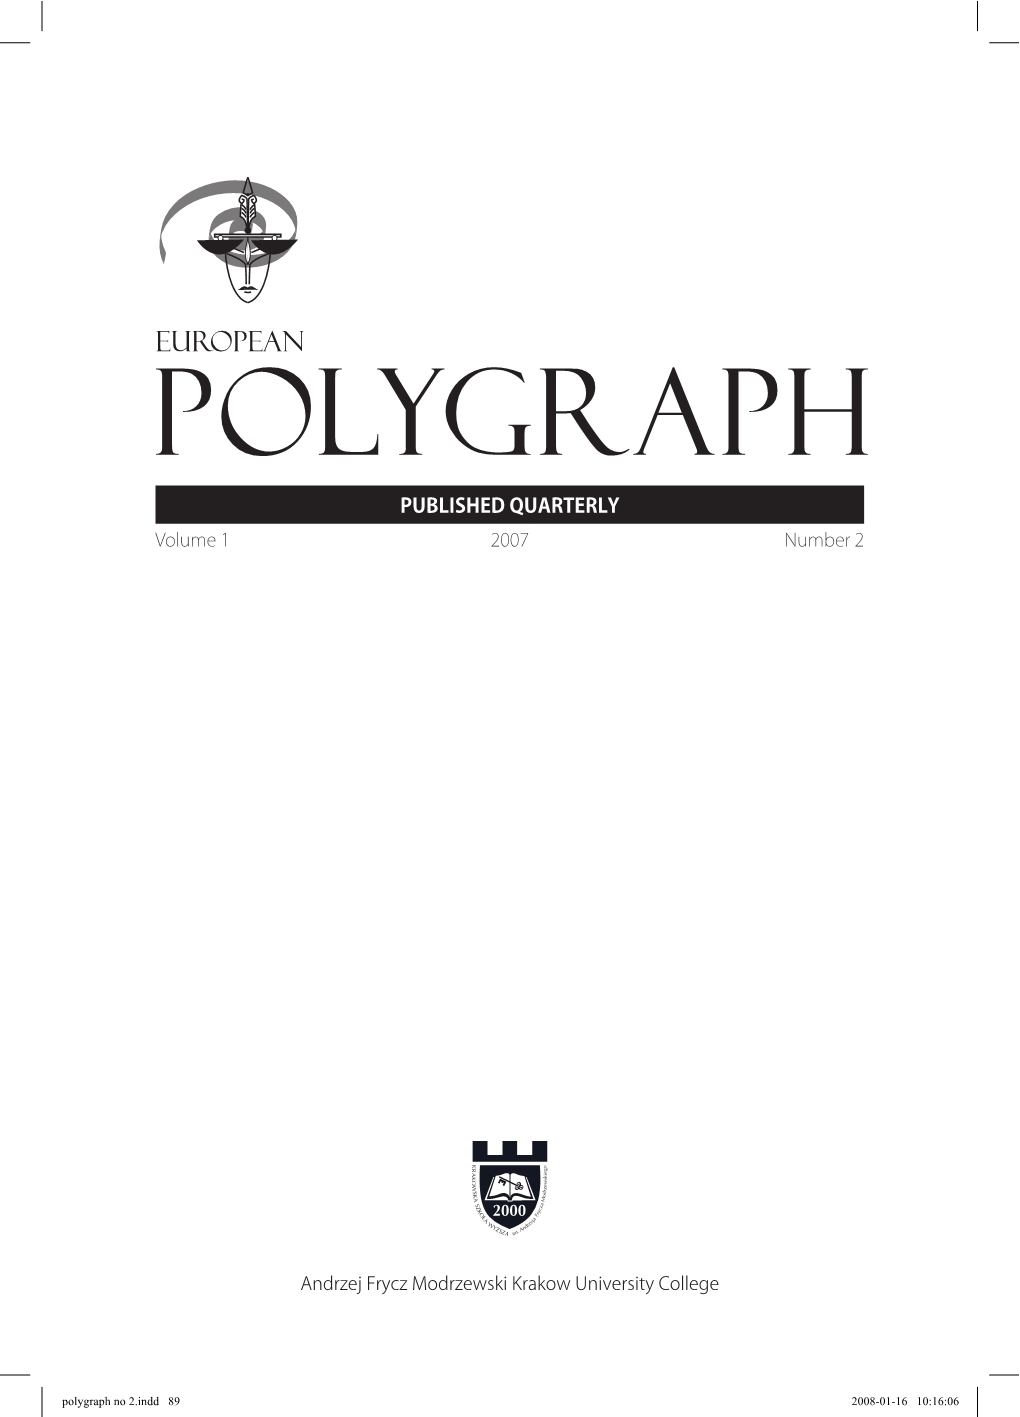 An attempt to falsify the results of a polygraph test through the implementation of false memory: a case study Cover Image